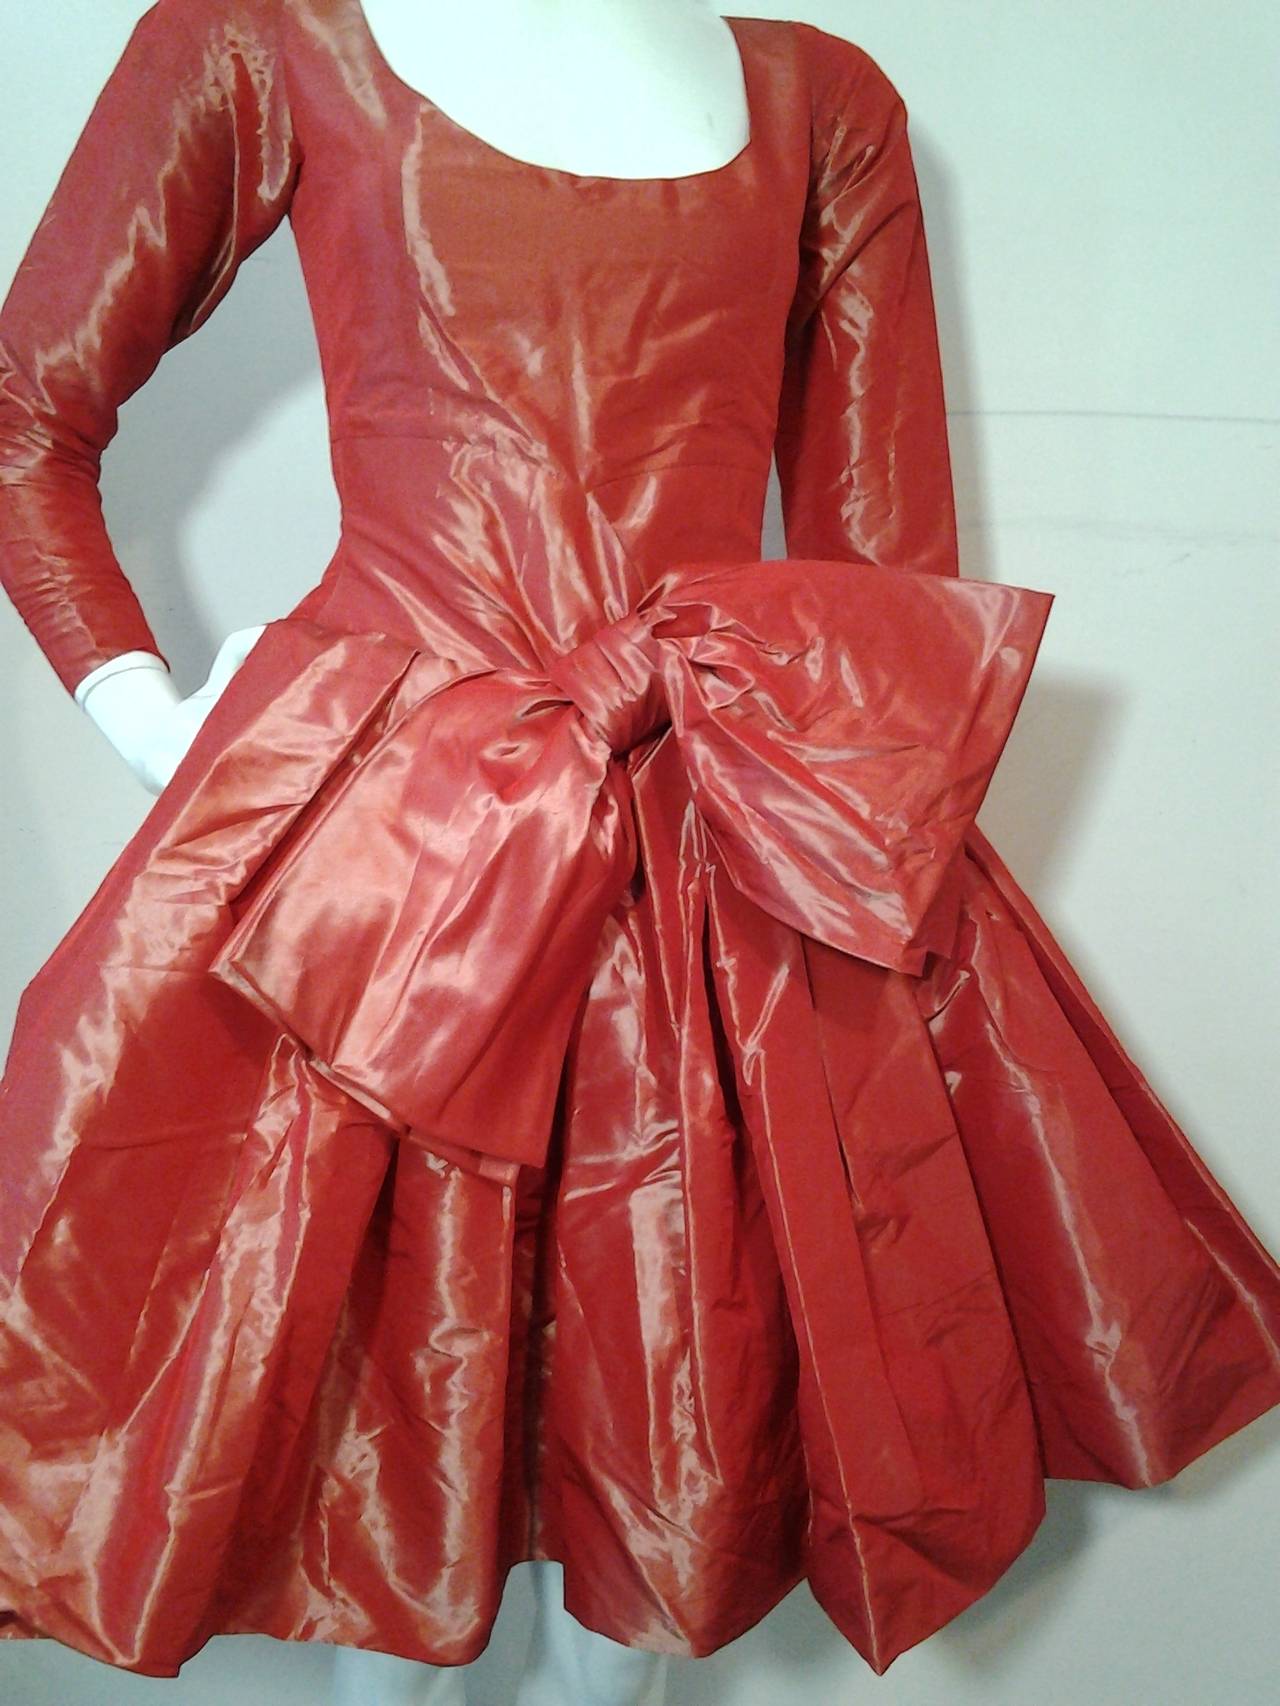 1980s Yves Saint Laurent - Rive Gauche Red Iridescent Pouf Dress In Excellent Condition For Sale In Gresham, OR